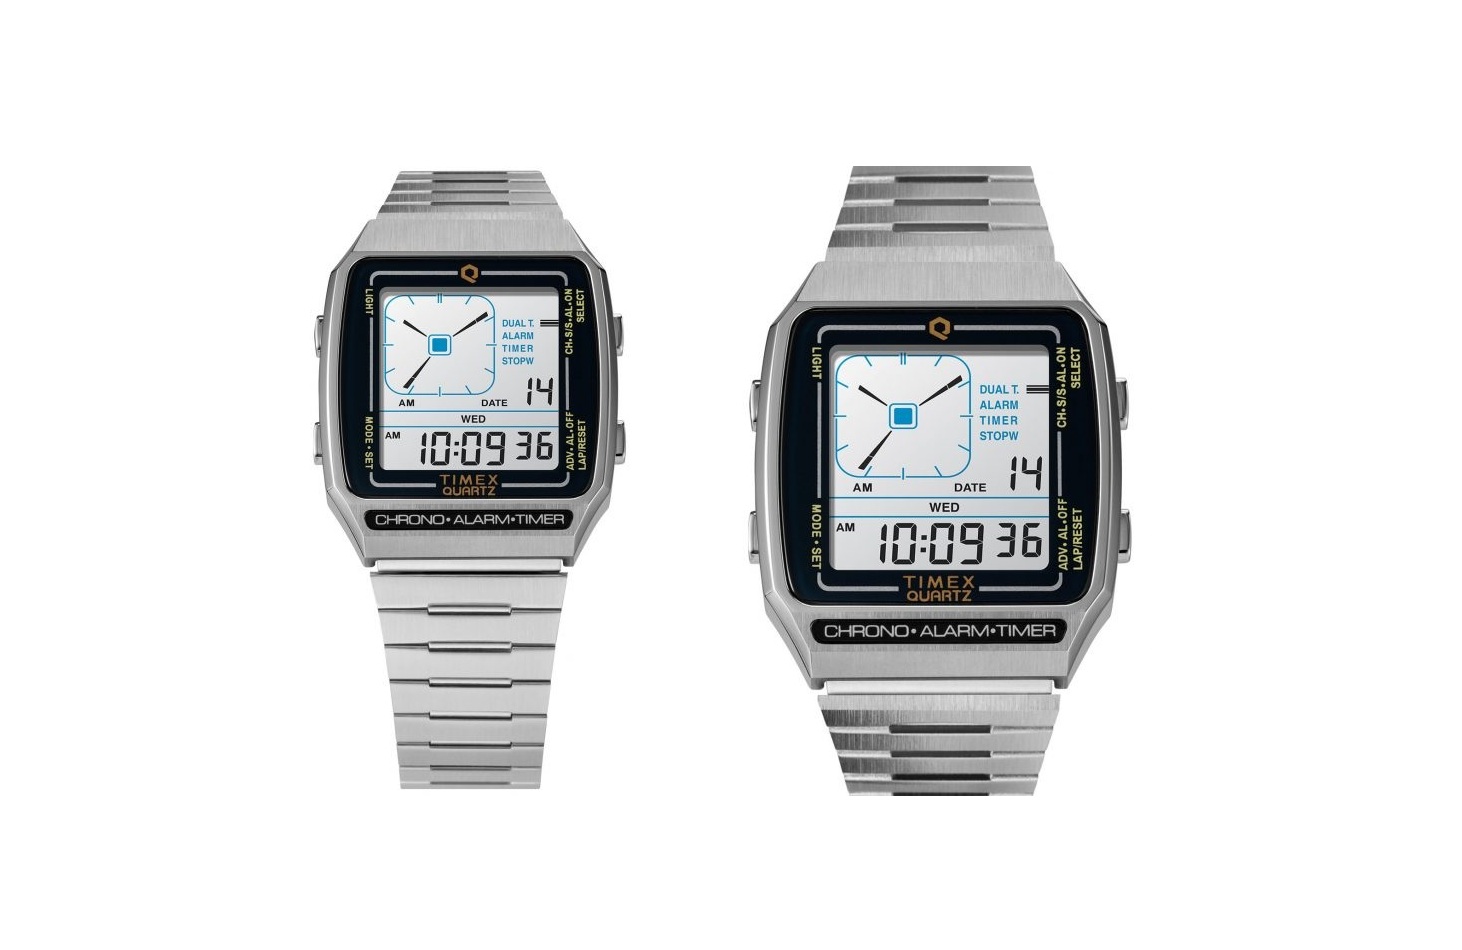 TIMEX 04K-096000 LCD Analog Watch User Guide